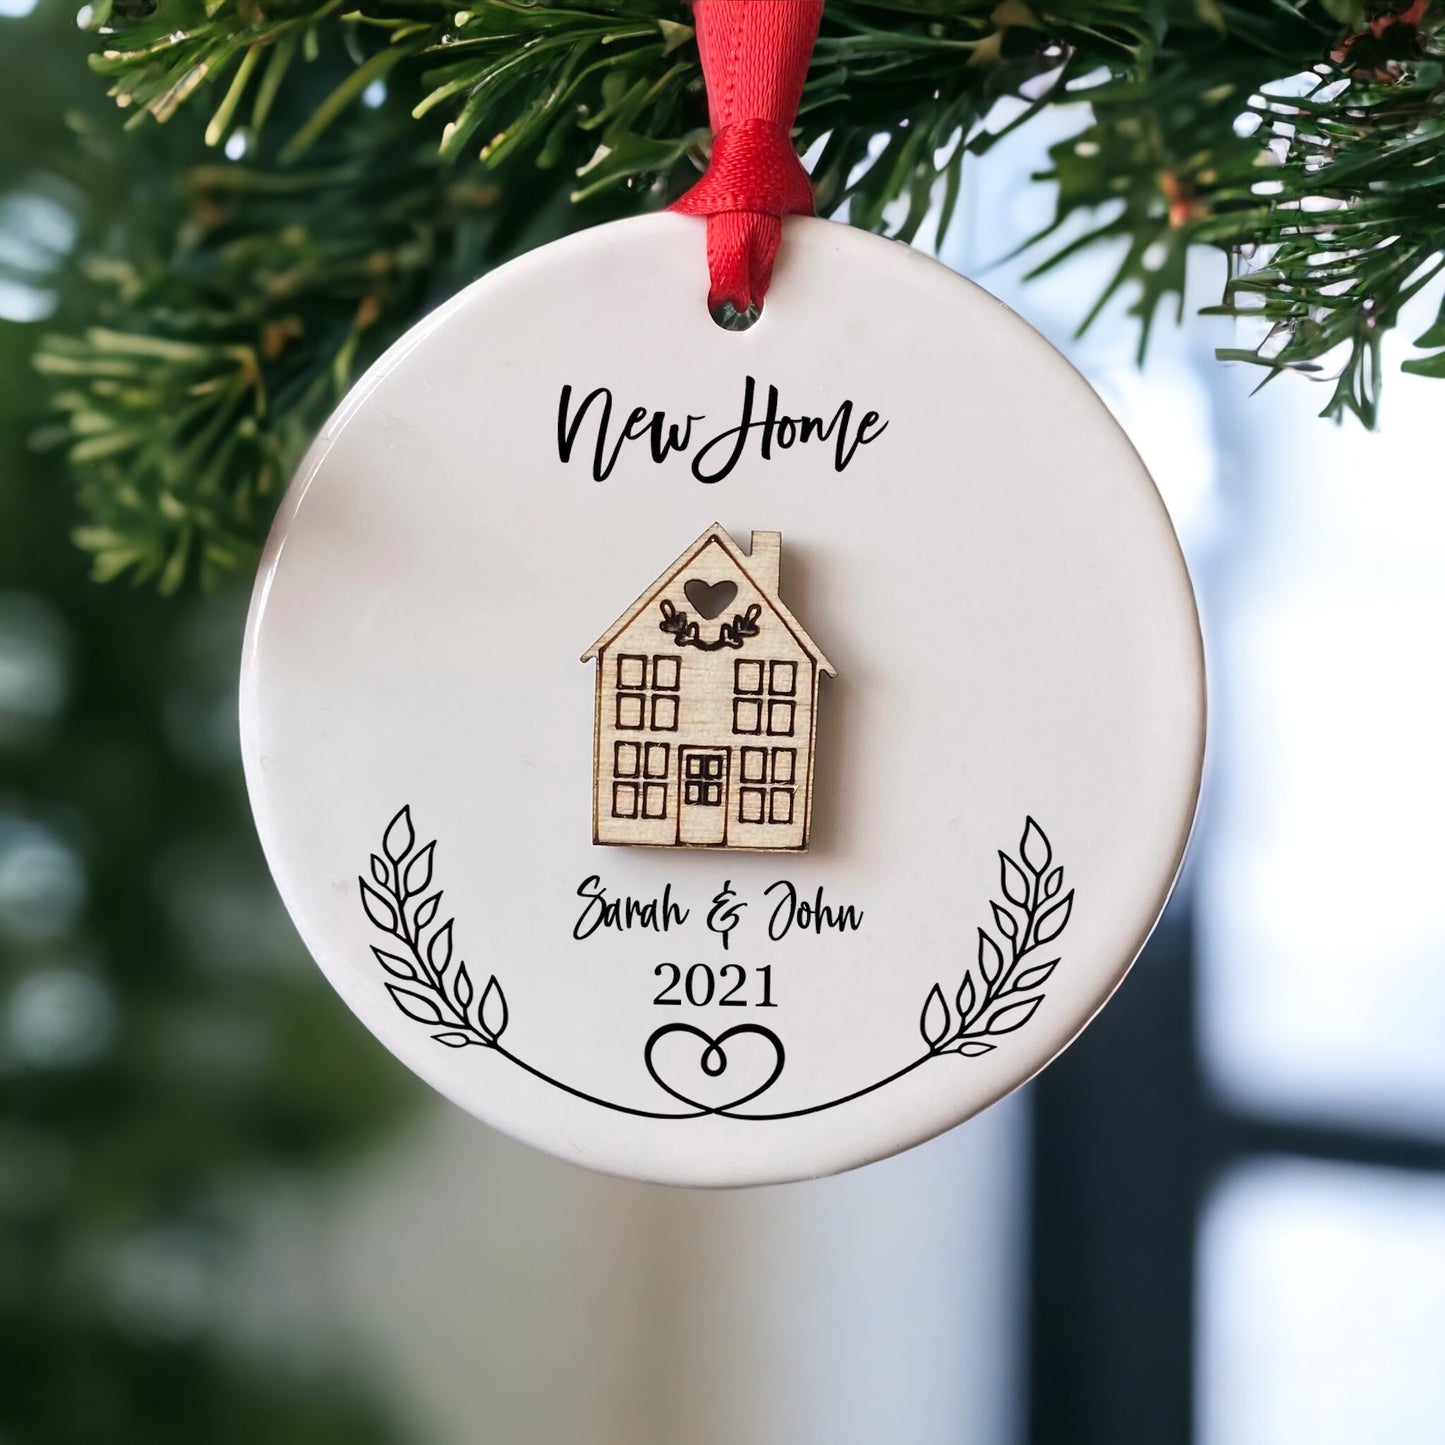 Personalised Ceramic New Home Round Decoration Ornament, Wooden house Christmas Decoration, New Home Gift